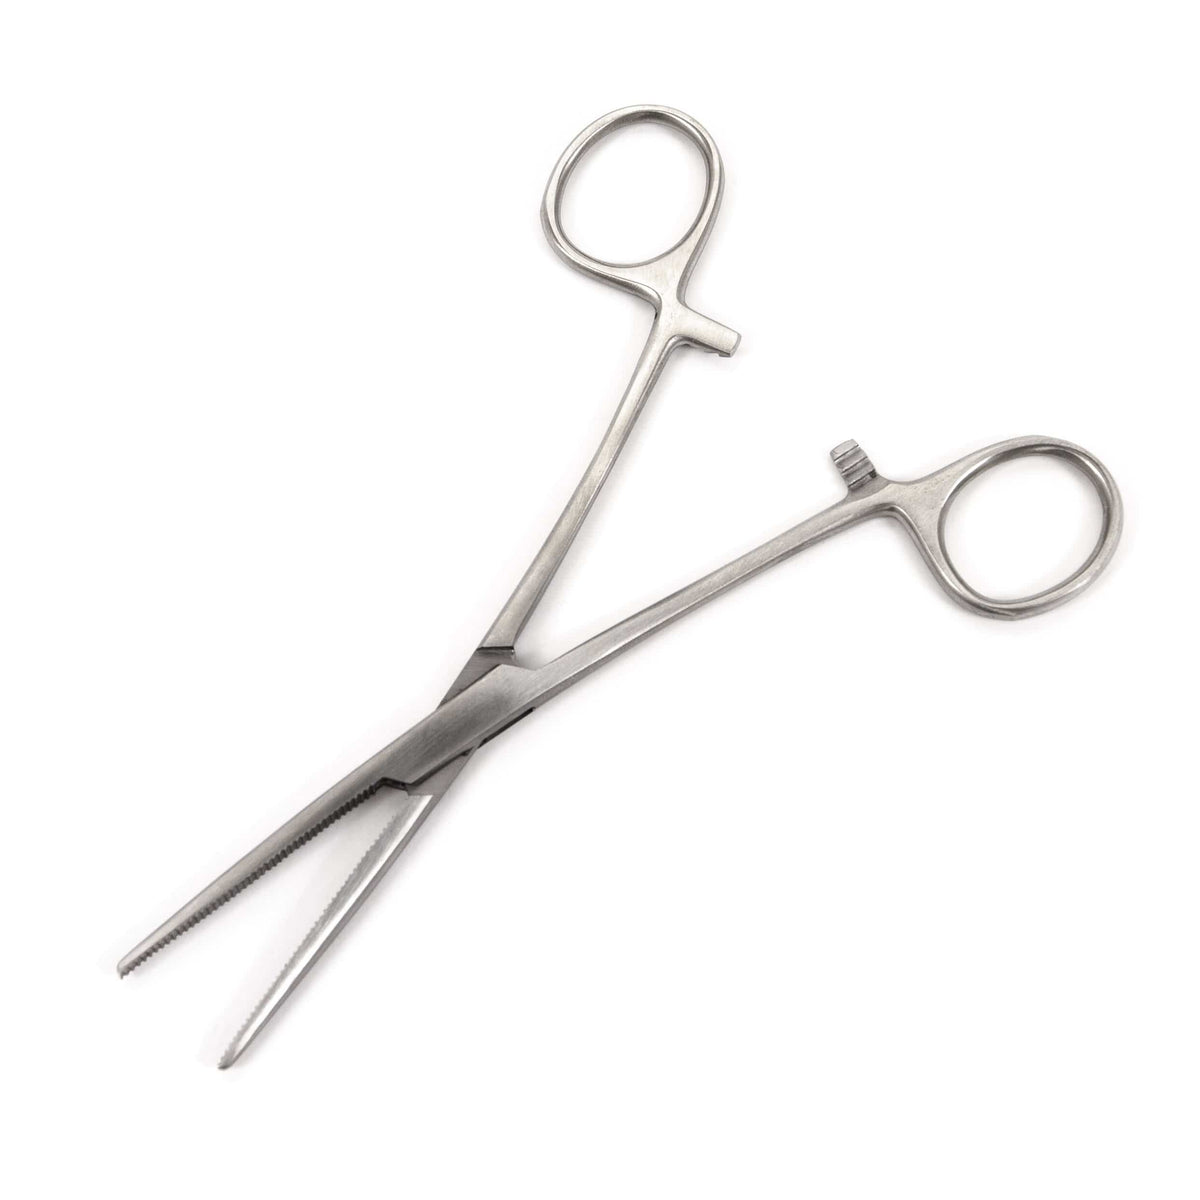 Wild Water Fly Fishing 6 Stainless Steel Forceps